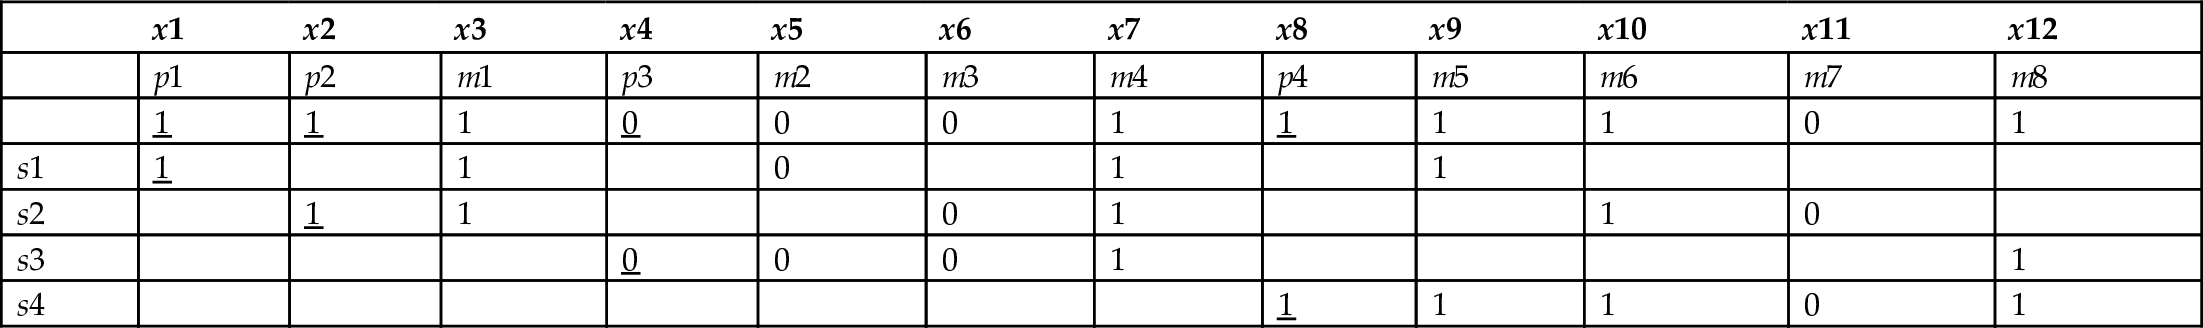 Table 9.1